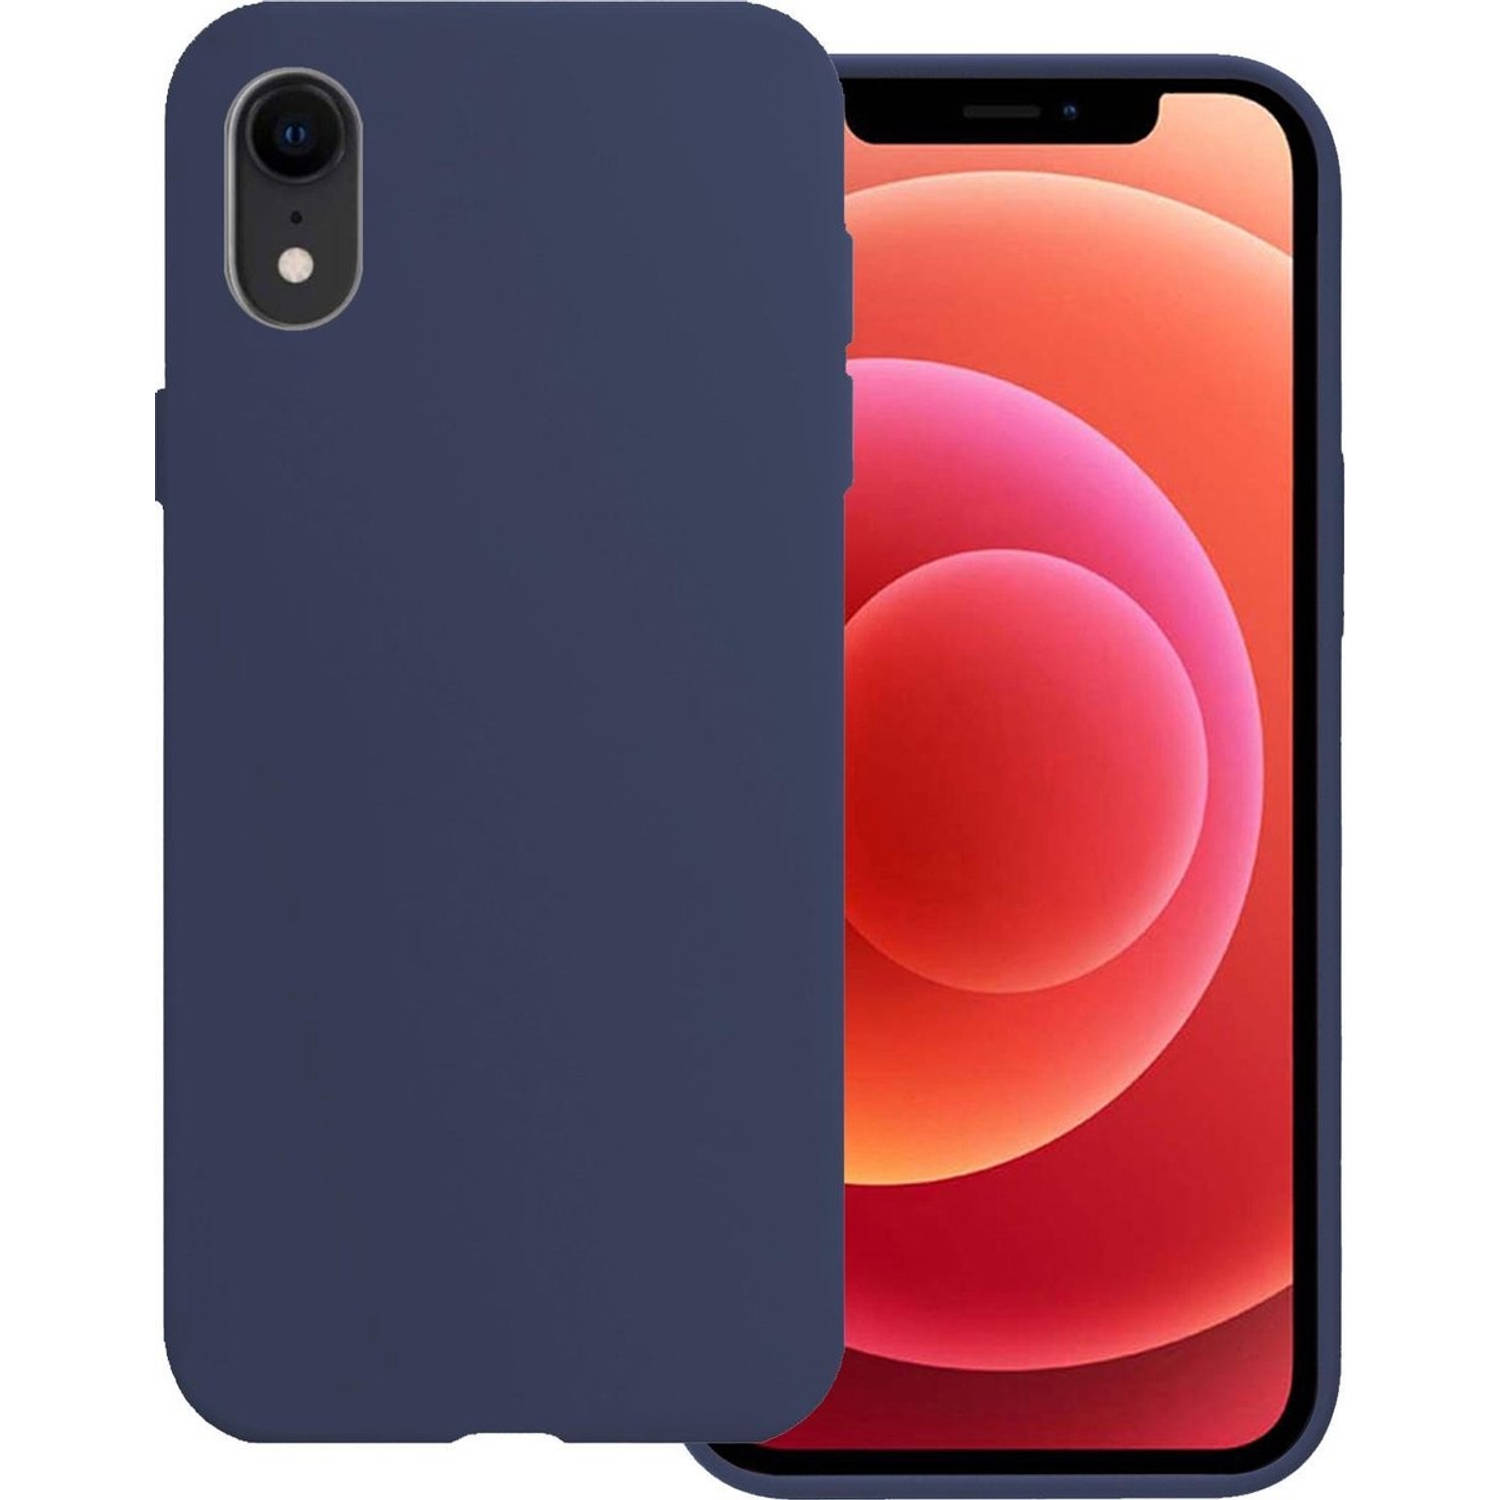 Basey Apple Iphone Xr Hoesje Siliconen Hoes Case Cover Apple Iphone Xr-donkerblauw